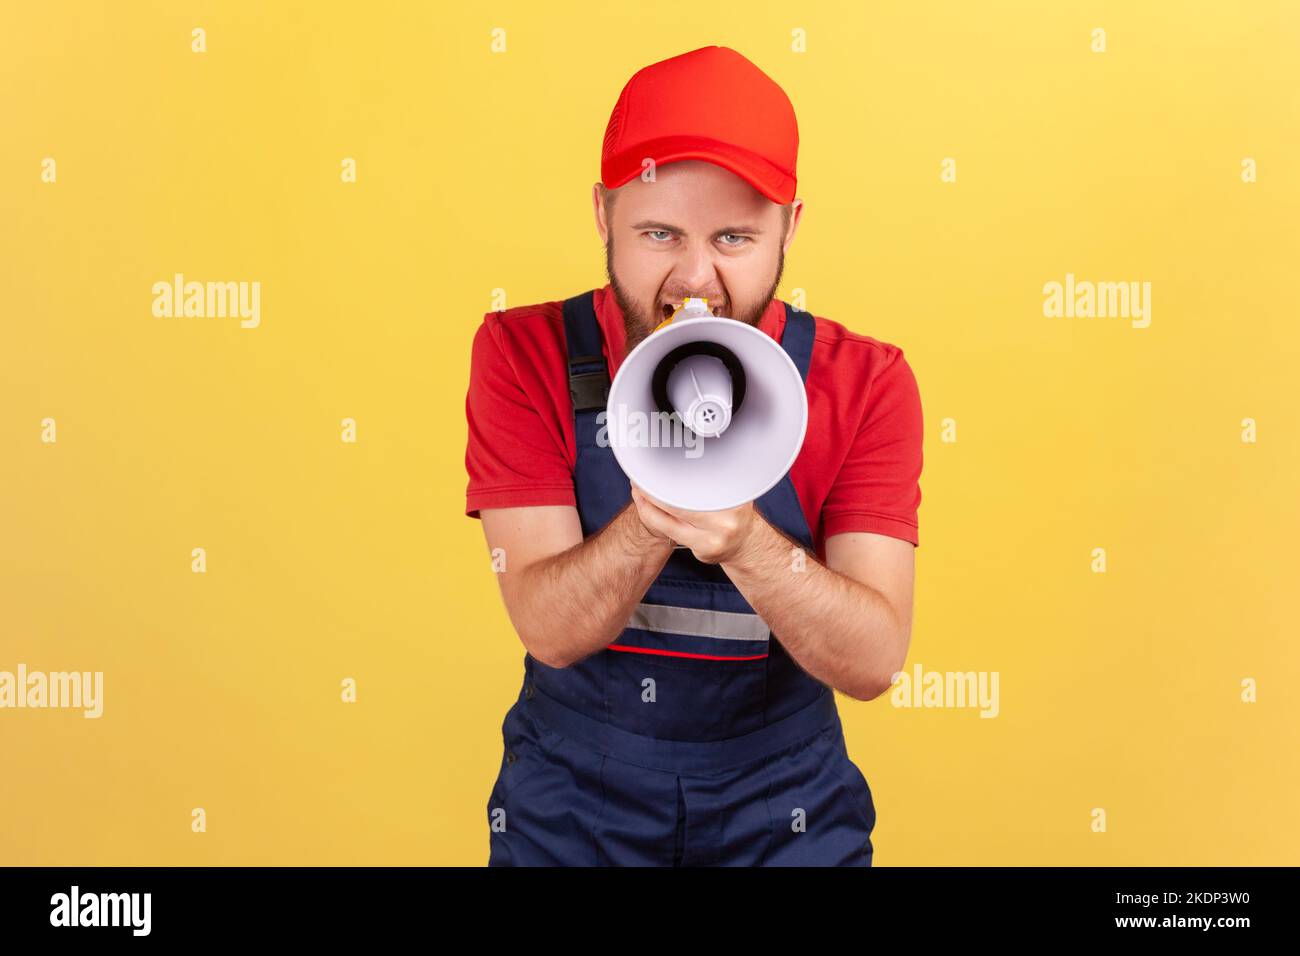 Portrait of angry worker man holding megaphone near mouth loudly speaking, screaming, making announcement, wearing blue uniform and red cap. Indoor studio shot isolated on yellow background. Stock Photo